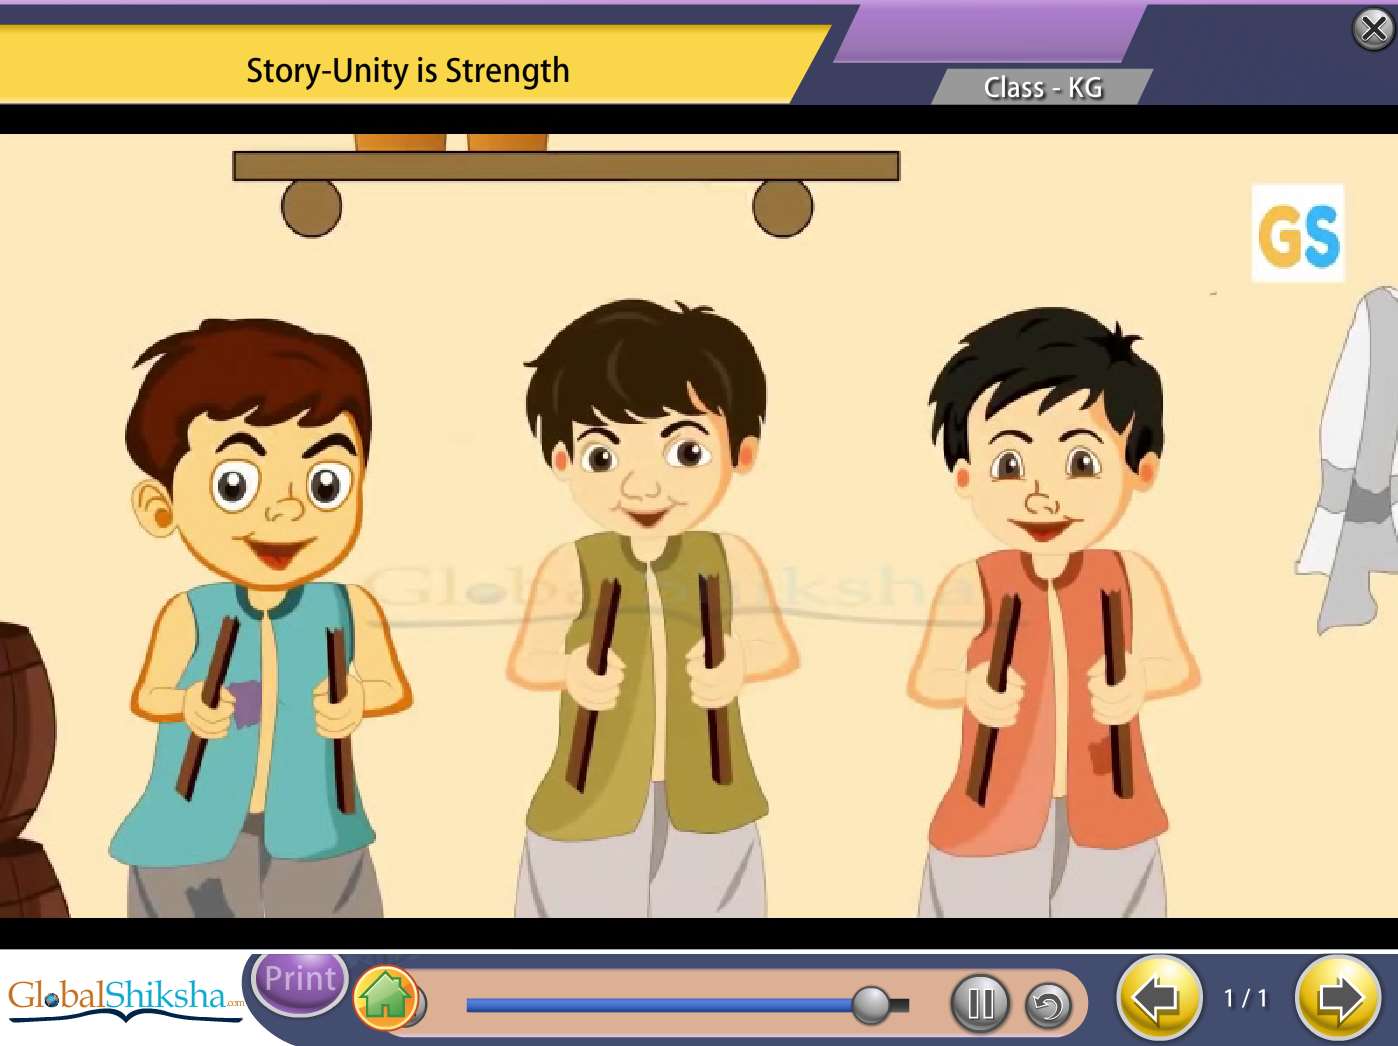 Maharashtra State Board LKG General knowledge, Stories & Rhymes Animated Pendrive in English